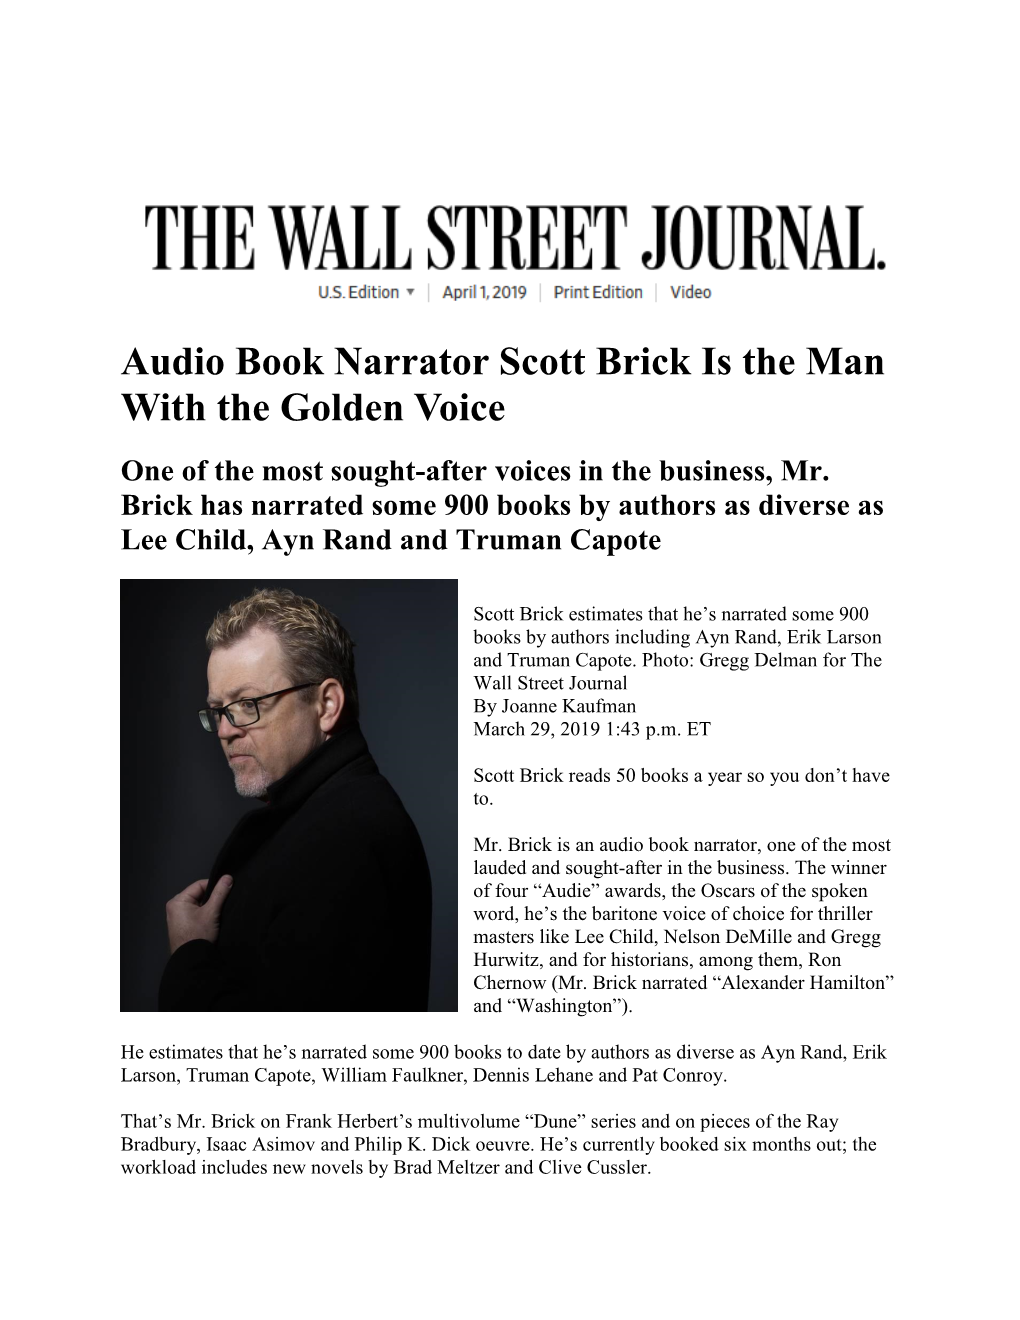 Audio Book Narrator Scott Brick Is the Man with the Golden Voice One of the Most Sought-After Voices in the Business, Mr